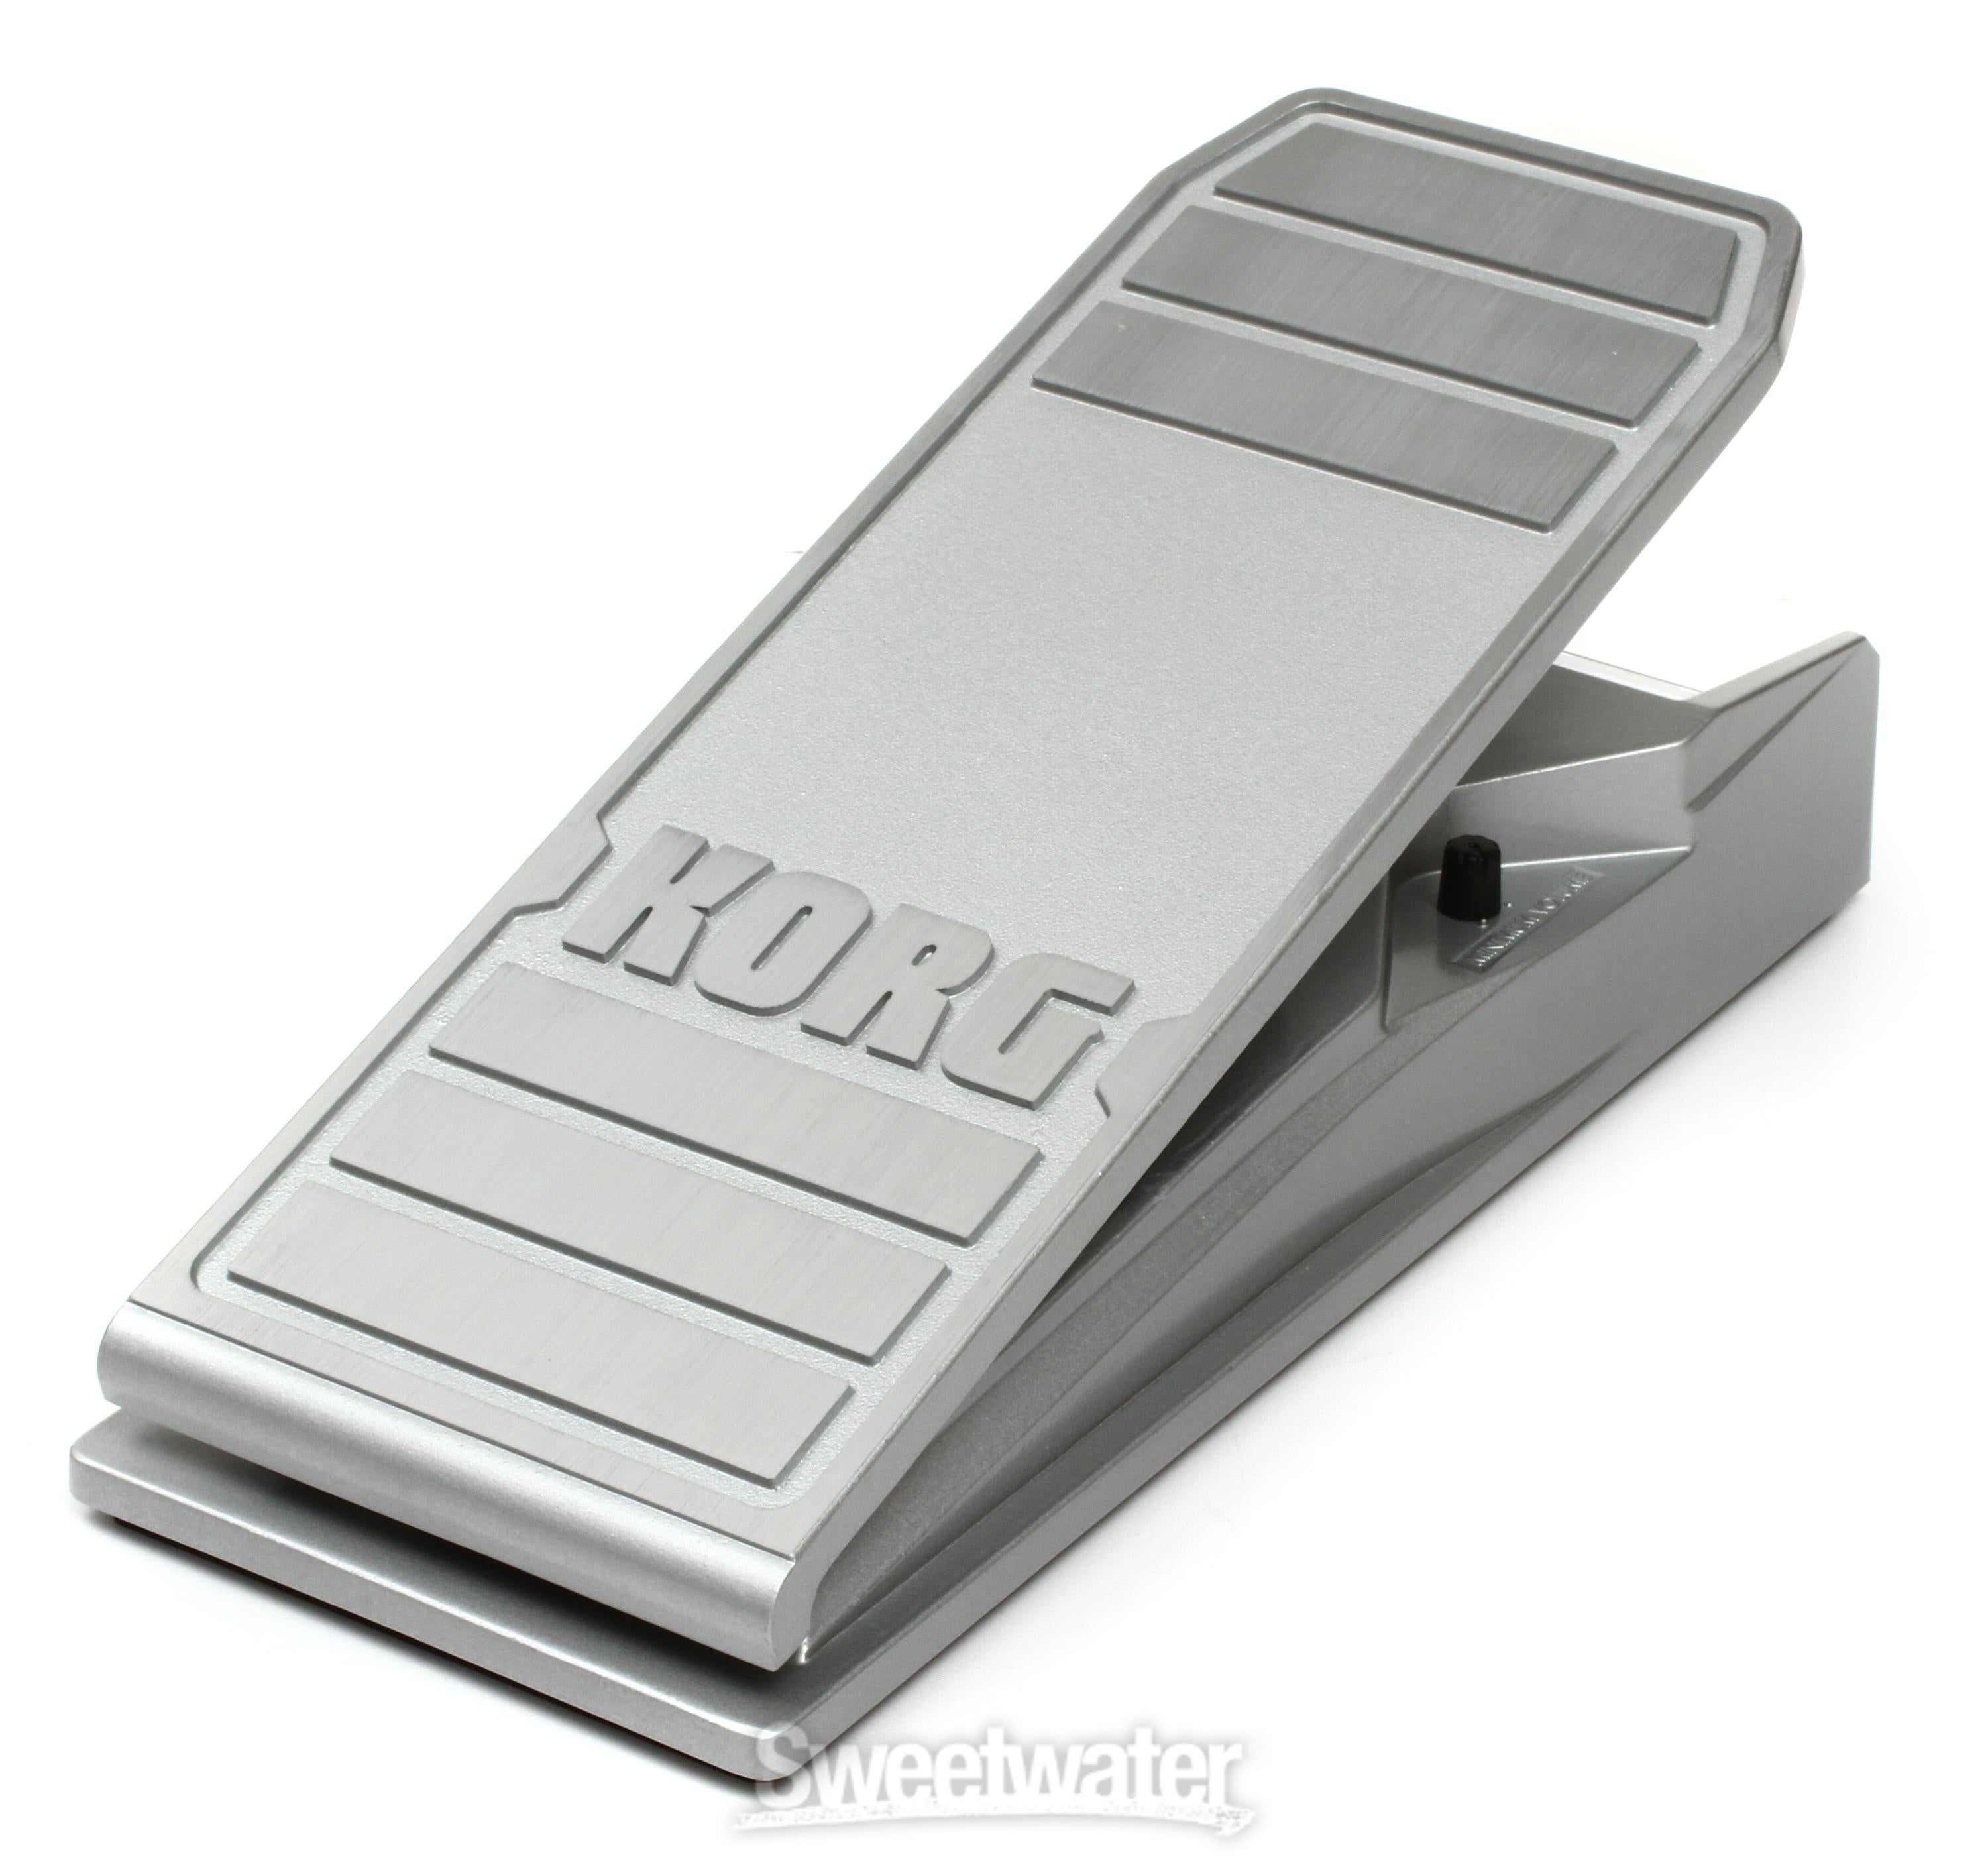 Korg XVP10 Stereo Volume/Expression Pedal Reviews | Sweetwater